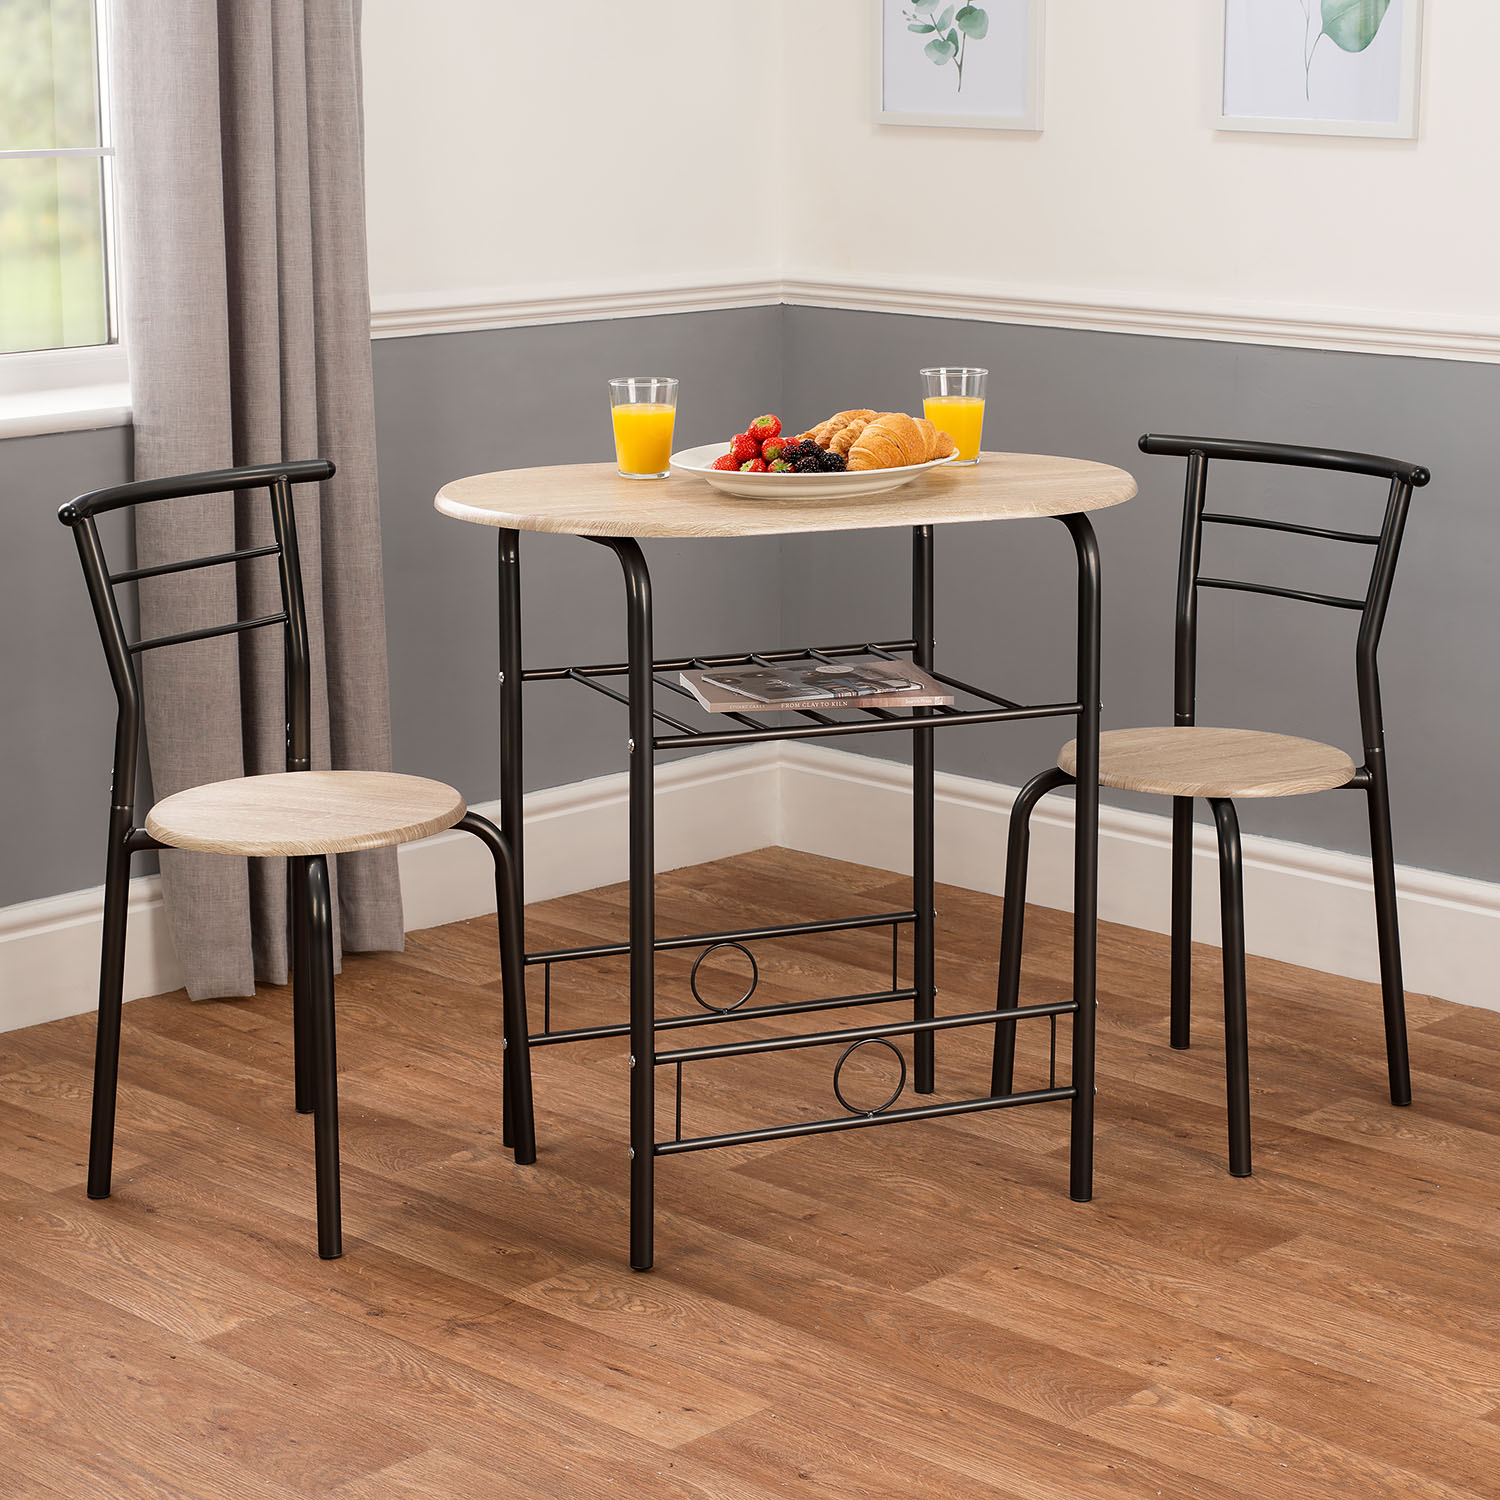 Space Saver Table and Chairs 2 Seater Dining Kitchen Breakfast Set Small Compact 